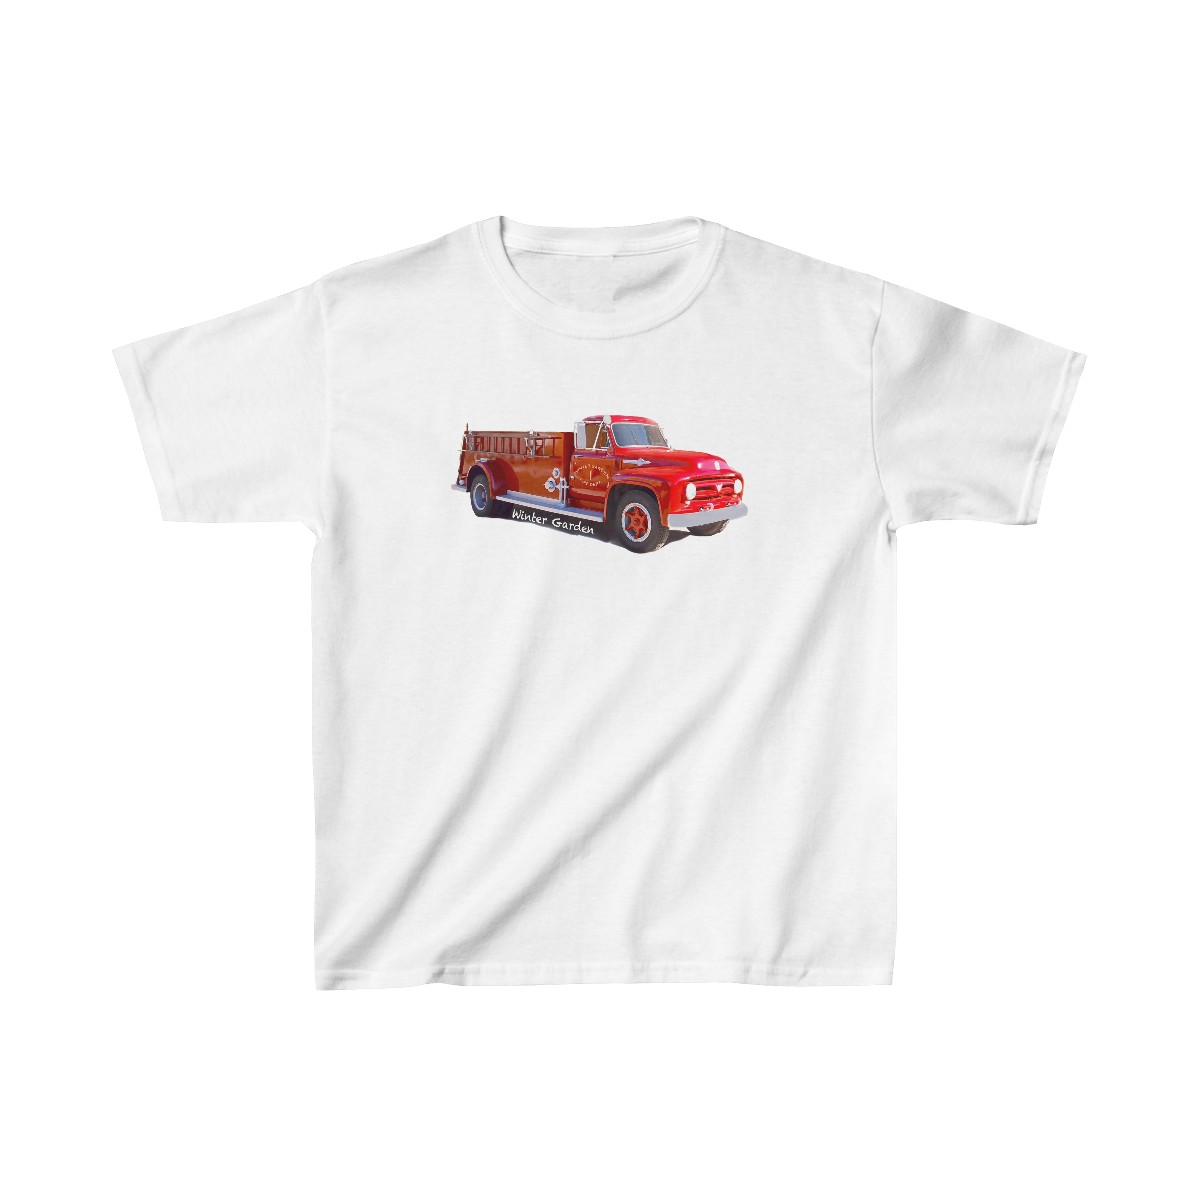 Kids Cotton T-shirt featuring the Heritage Fire Engine product thumbnail image